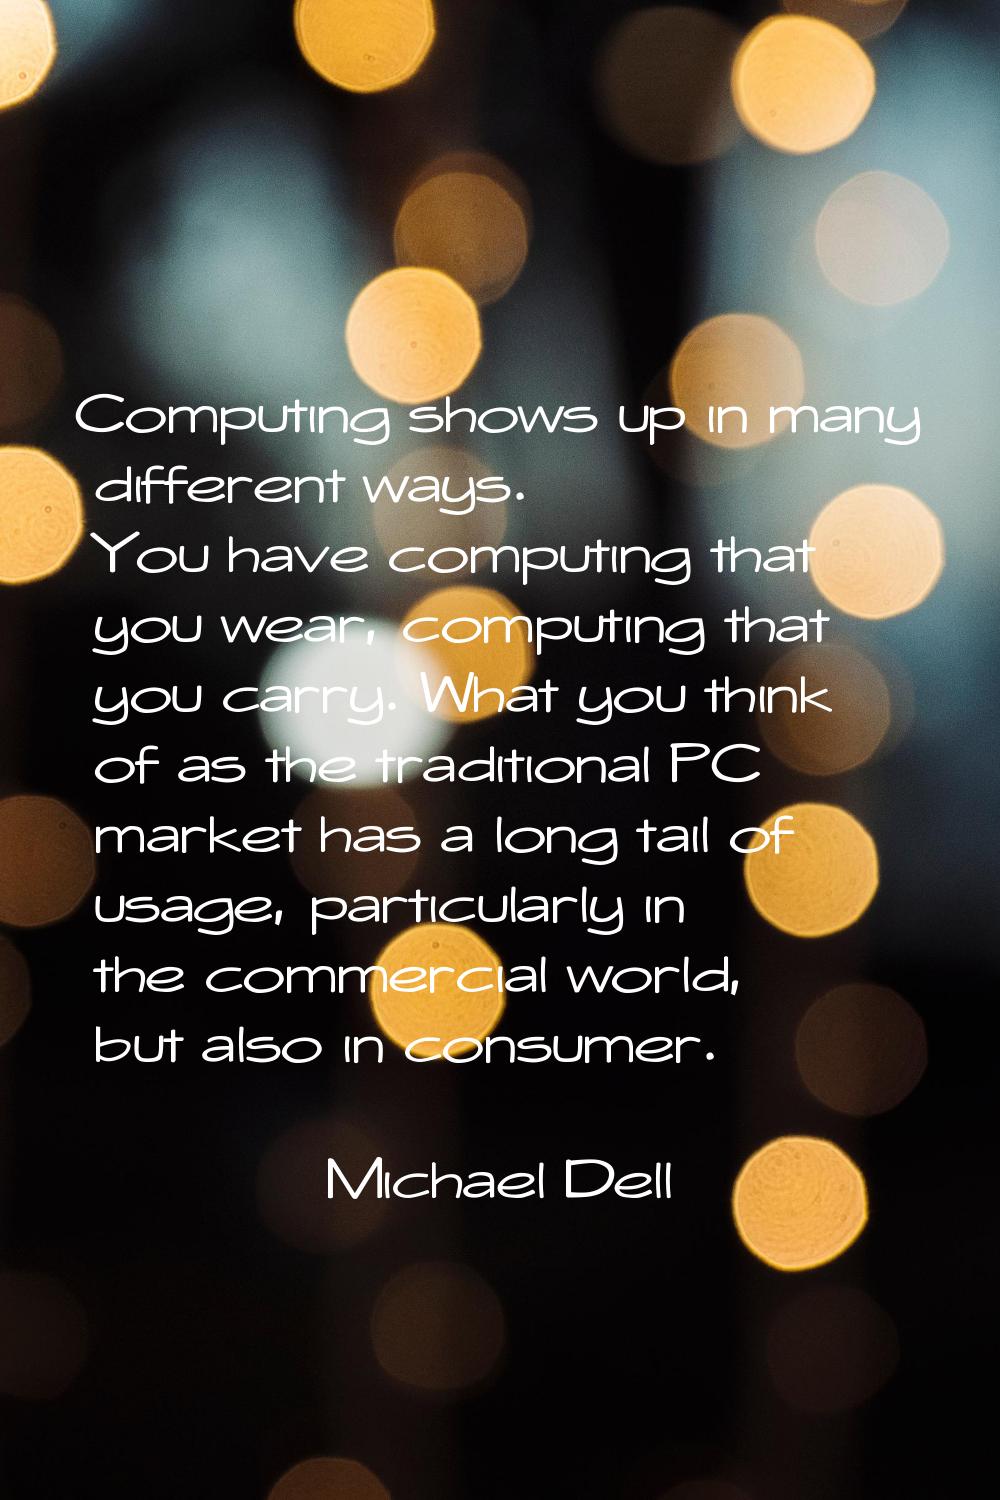 Computing shows up in many different ways. You have computing that you wear, computing that you car